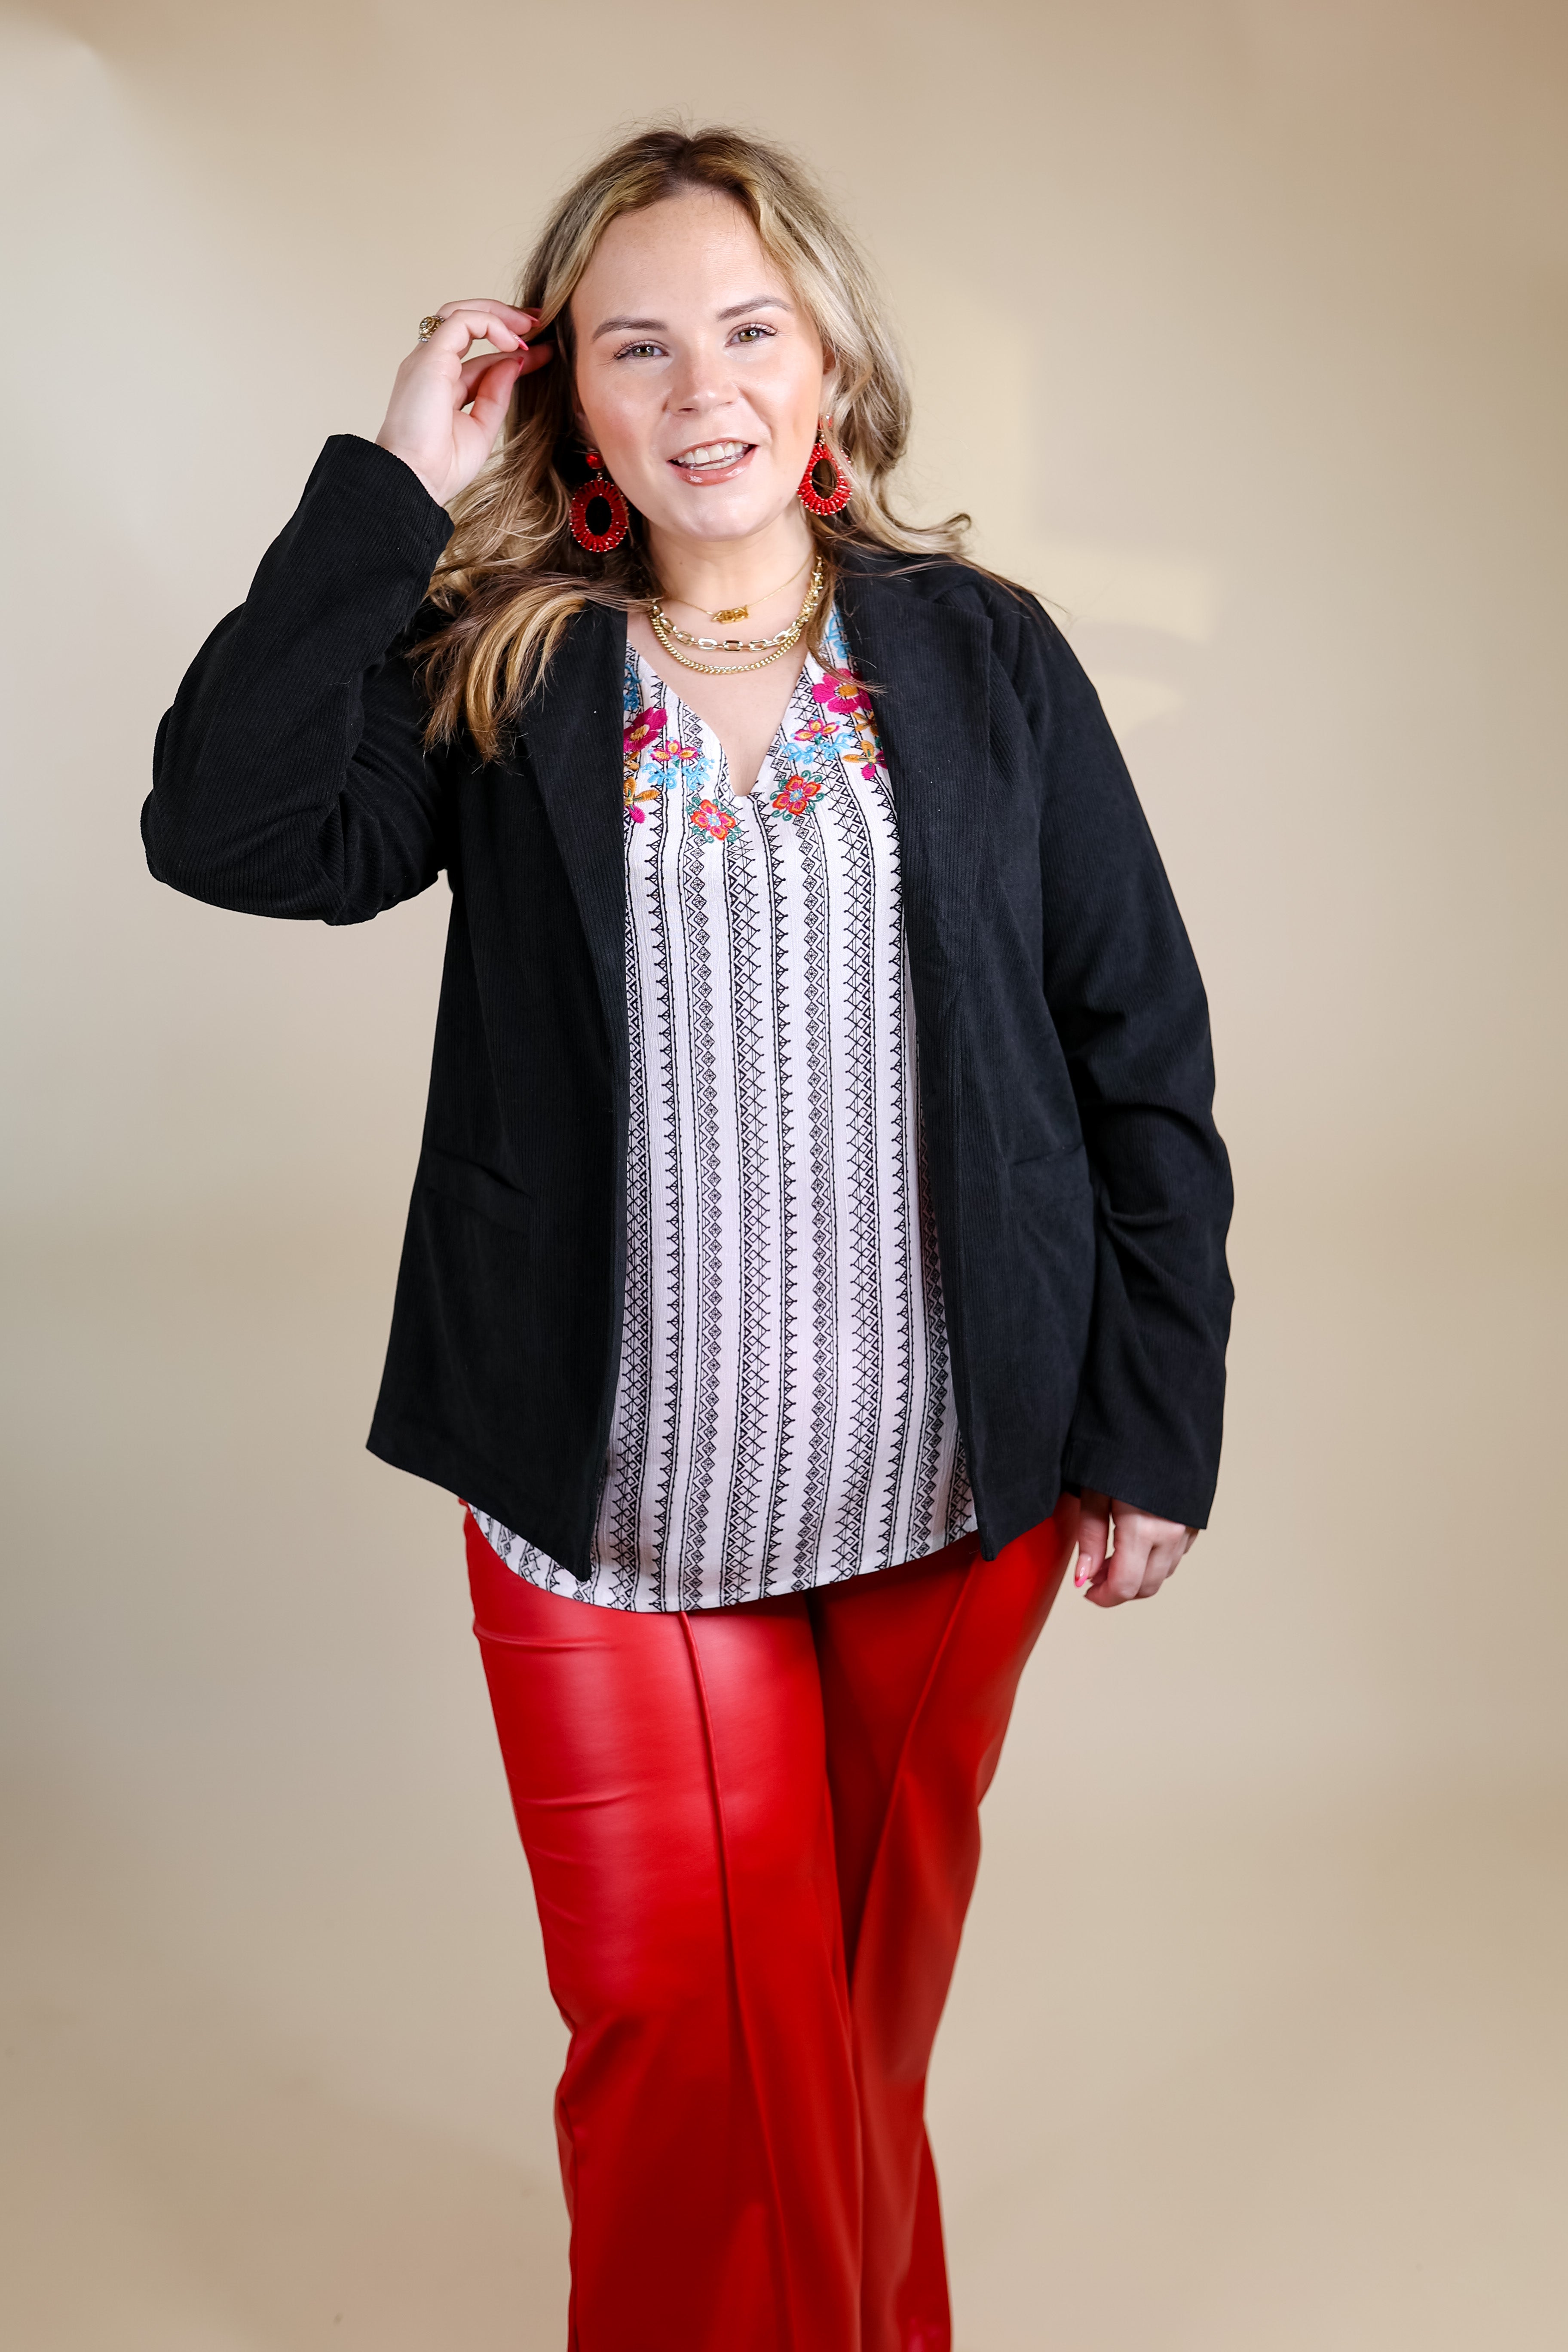 New York Groove Corduroy Blazer in Black - Giddy Up Glamour Boutique